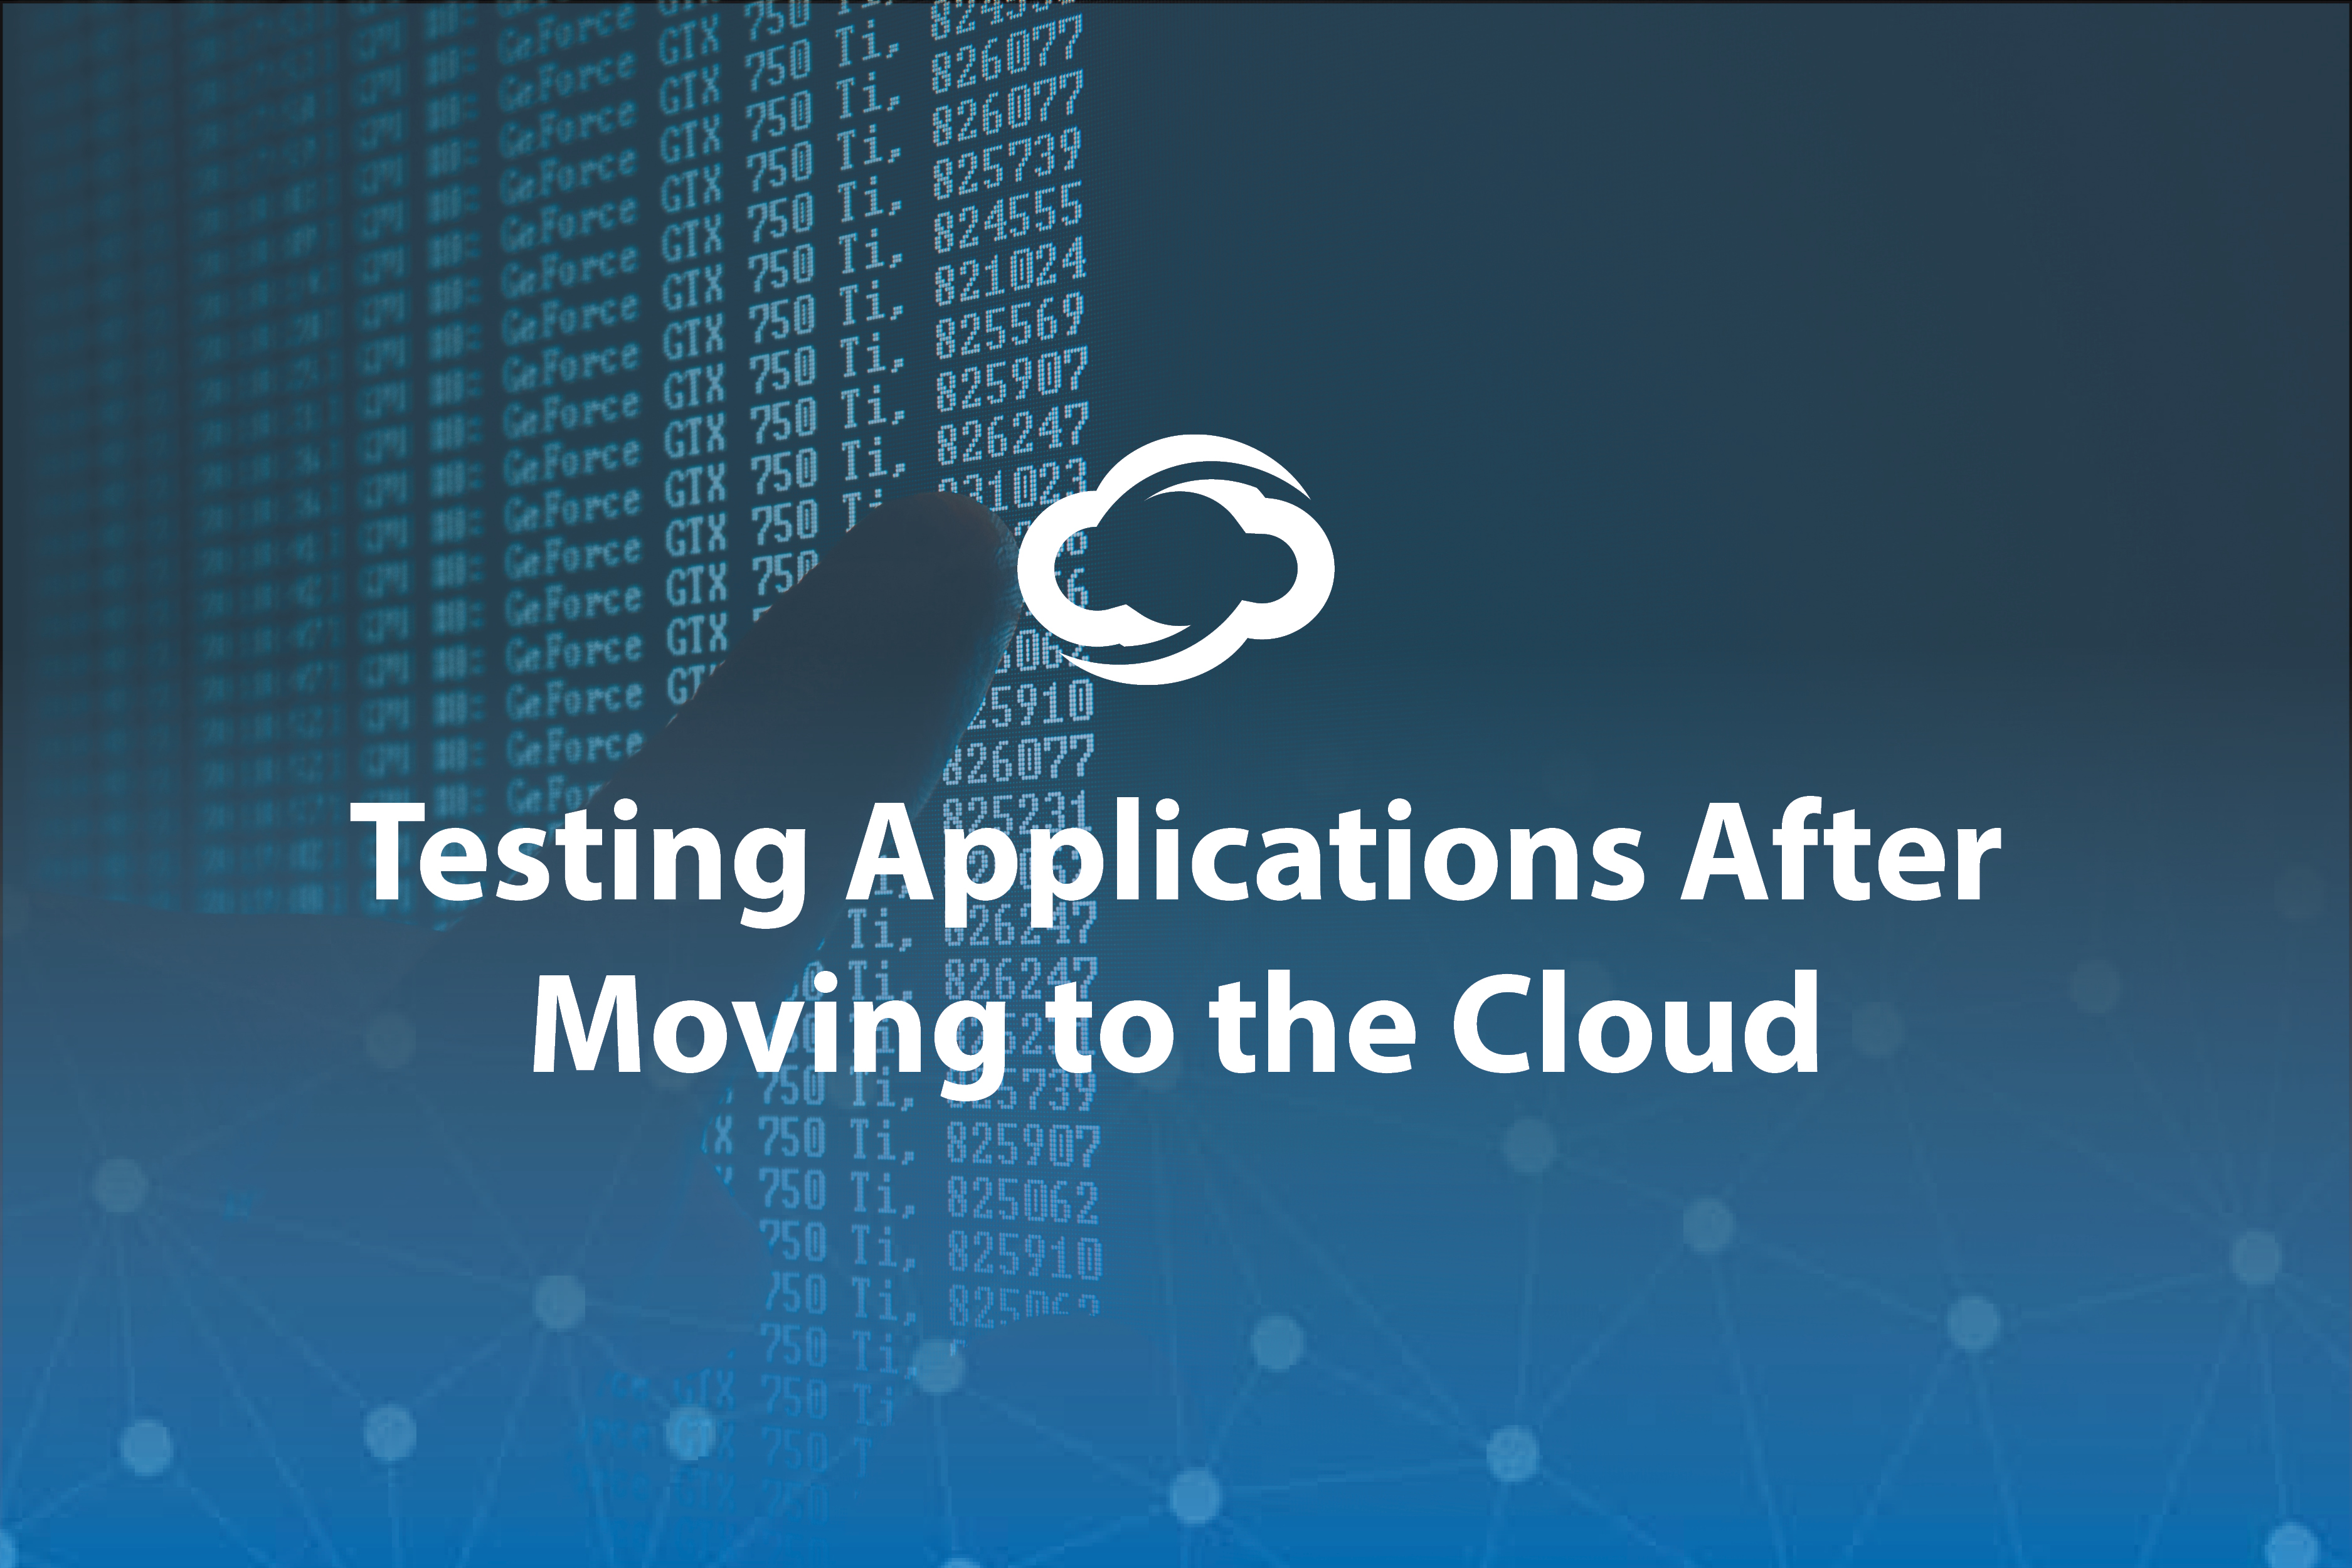 Blog Image - Testing Applications After Migrating to the Cloud